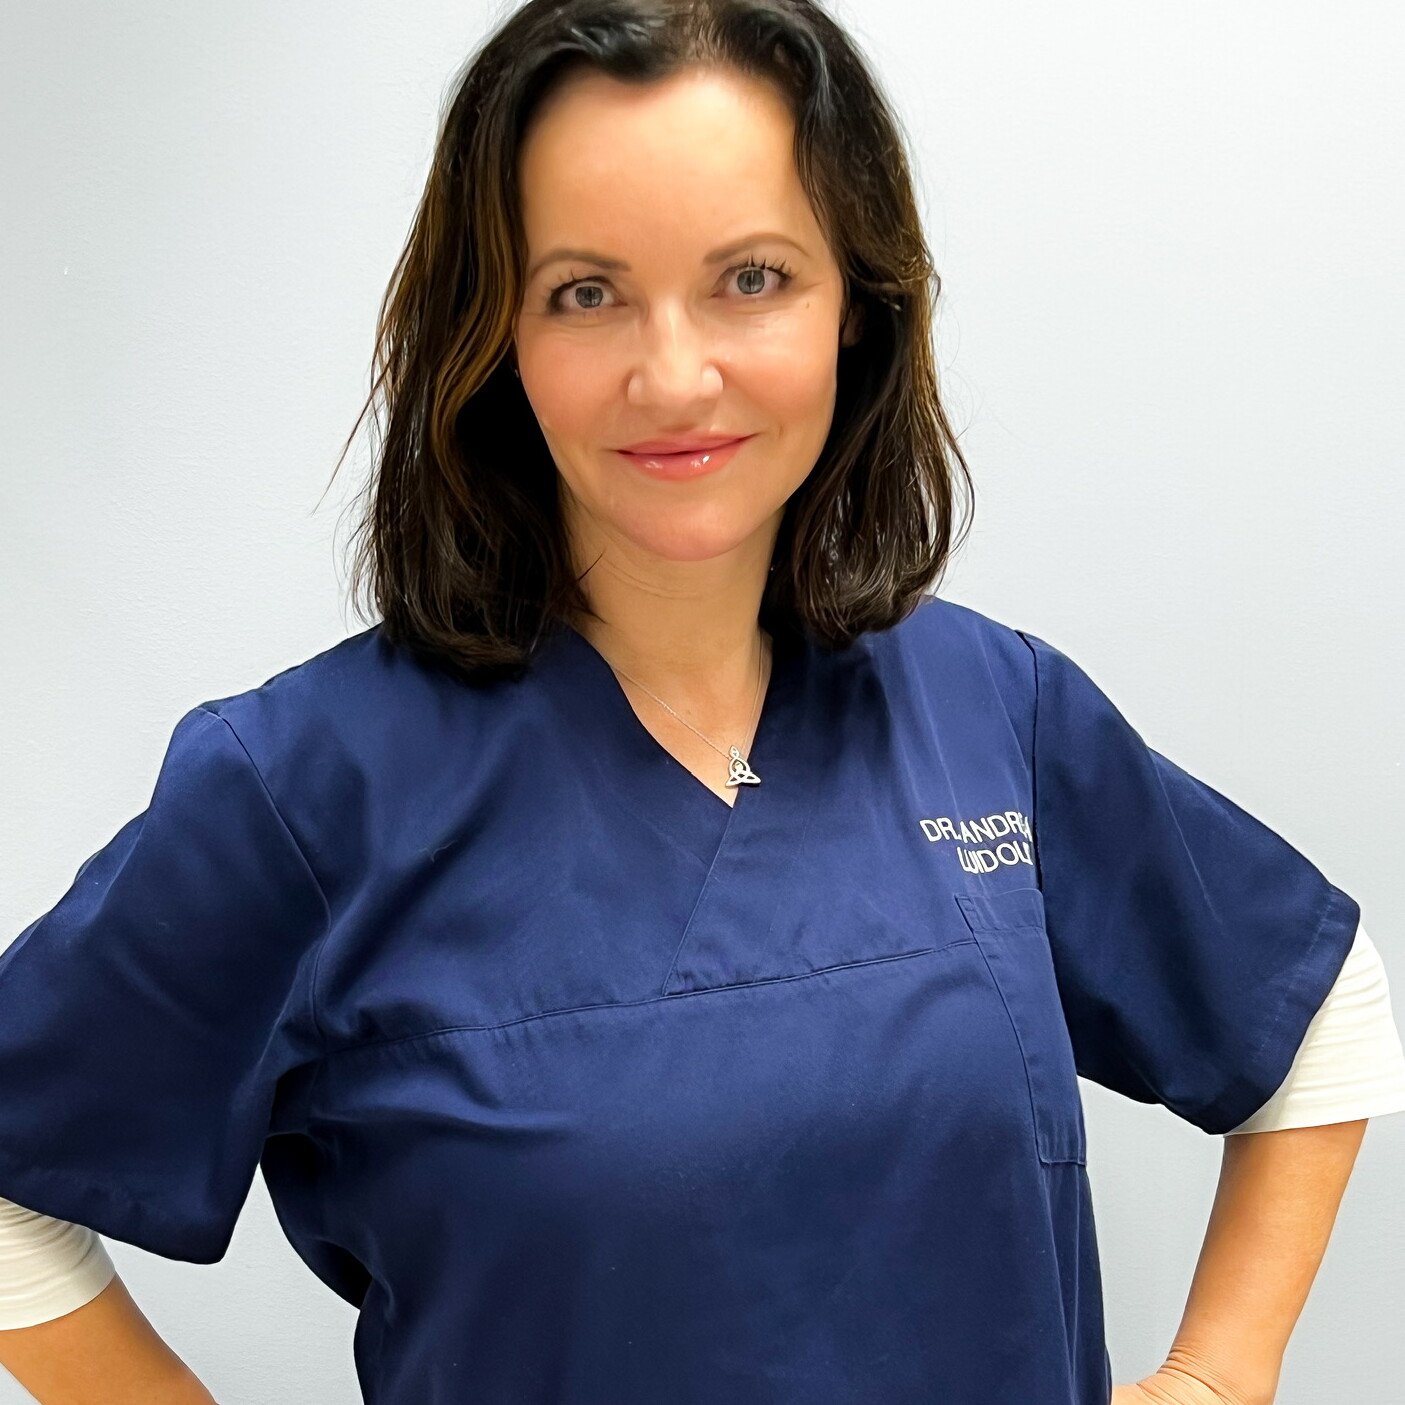 Dr. Andrea Luidold